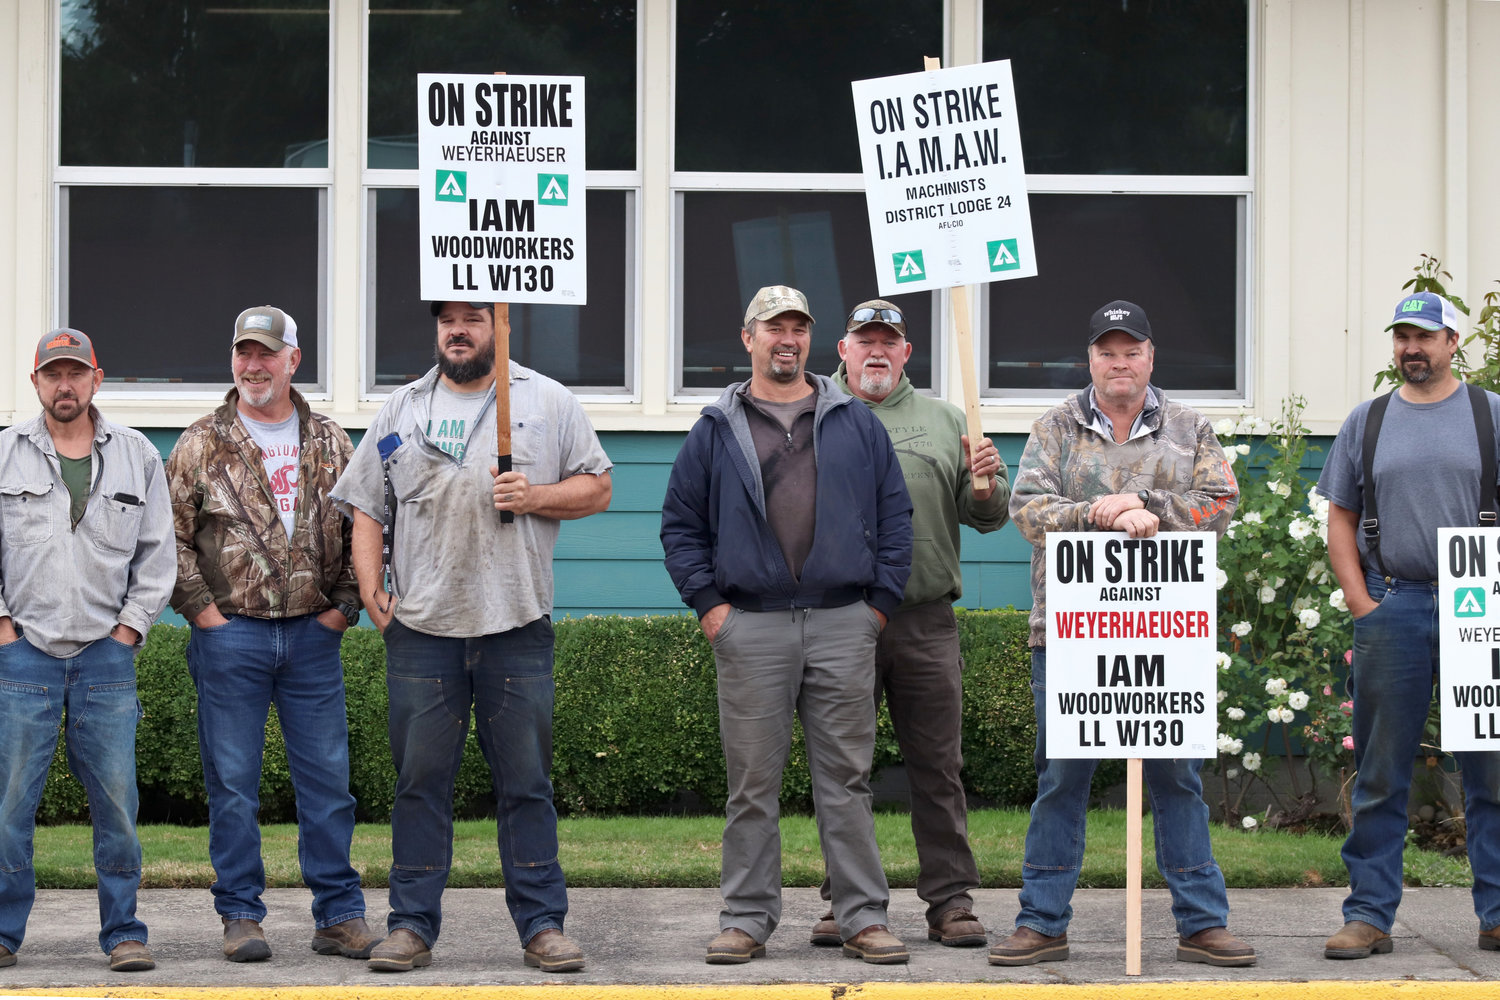 Fourteen Weyerhaeuser Co. employees picketed in front of the timber company’s research center on Pearl Street in Centralia on Thursday to continue their protest of Weyerhaeuser’s latest contract proposal. 